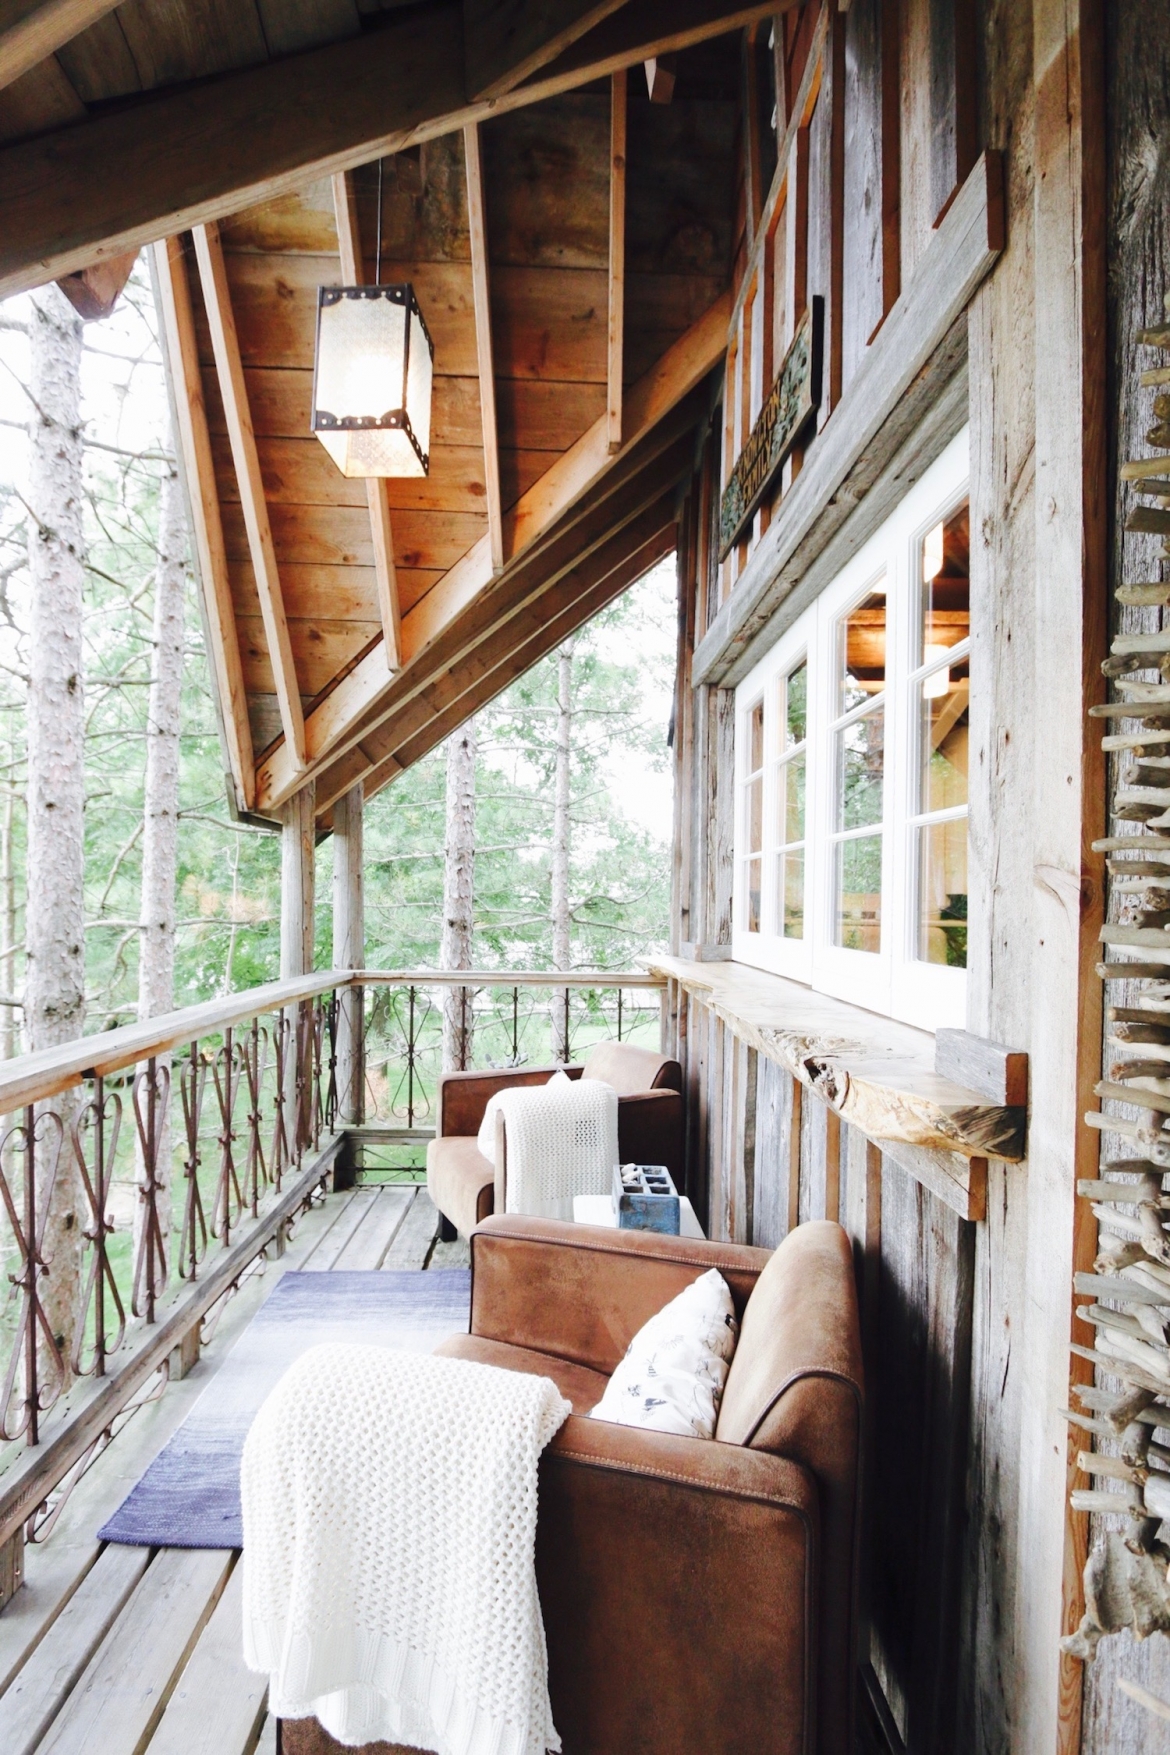 Book your vacation rental at the Treehouse & Cabin Retreat ! Available for rent from May - Oct ... it's luxury glamping at its finest! Branch out in a #treehouse & glamp in the cabin. You'll LOVE IT. Perfect for 4-6 people. Located 2 hrs NW of Toronto, Ontario